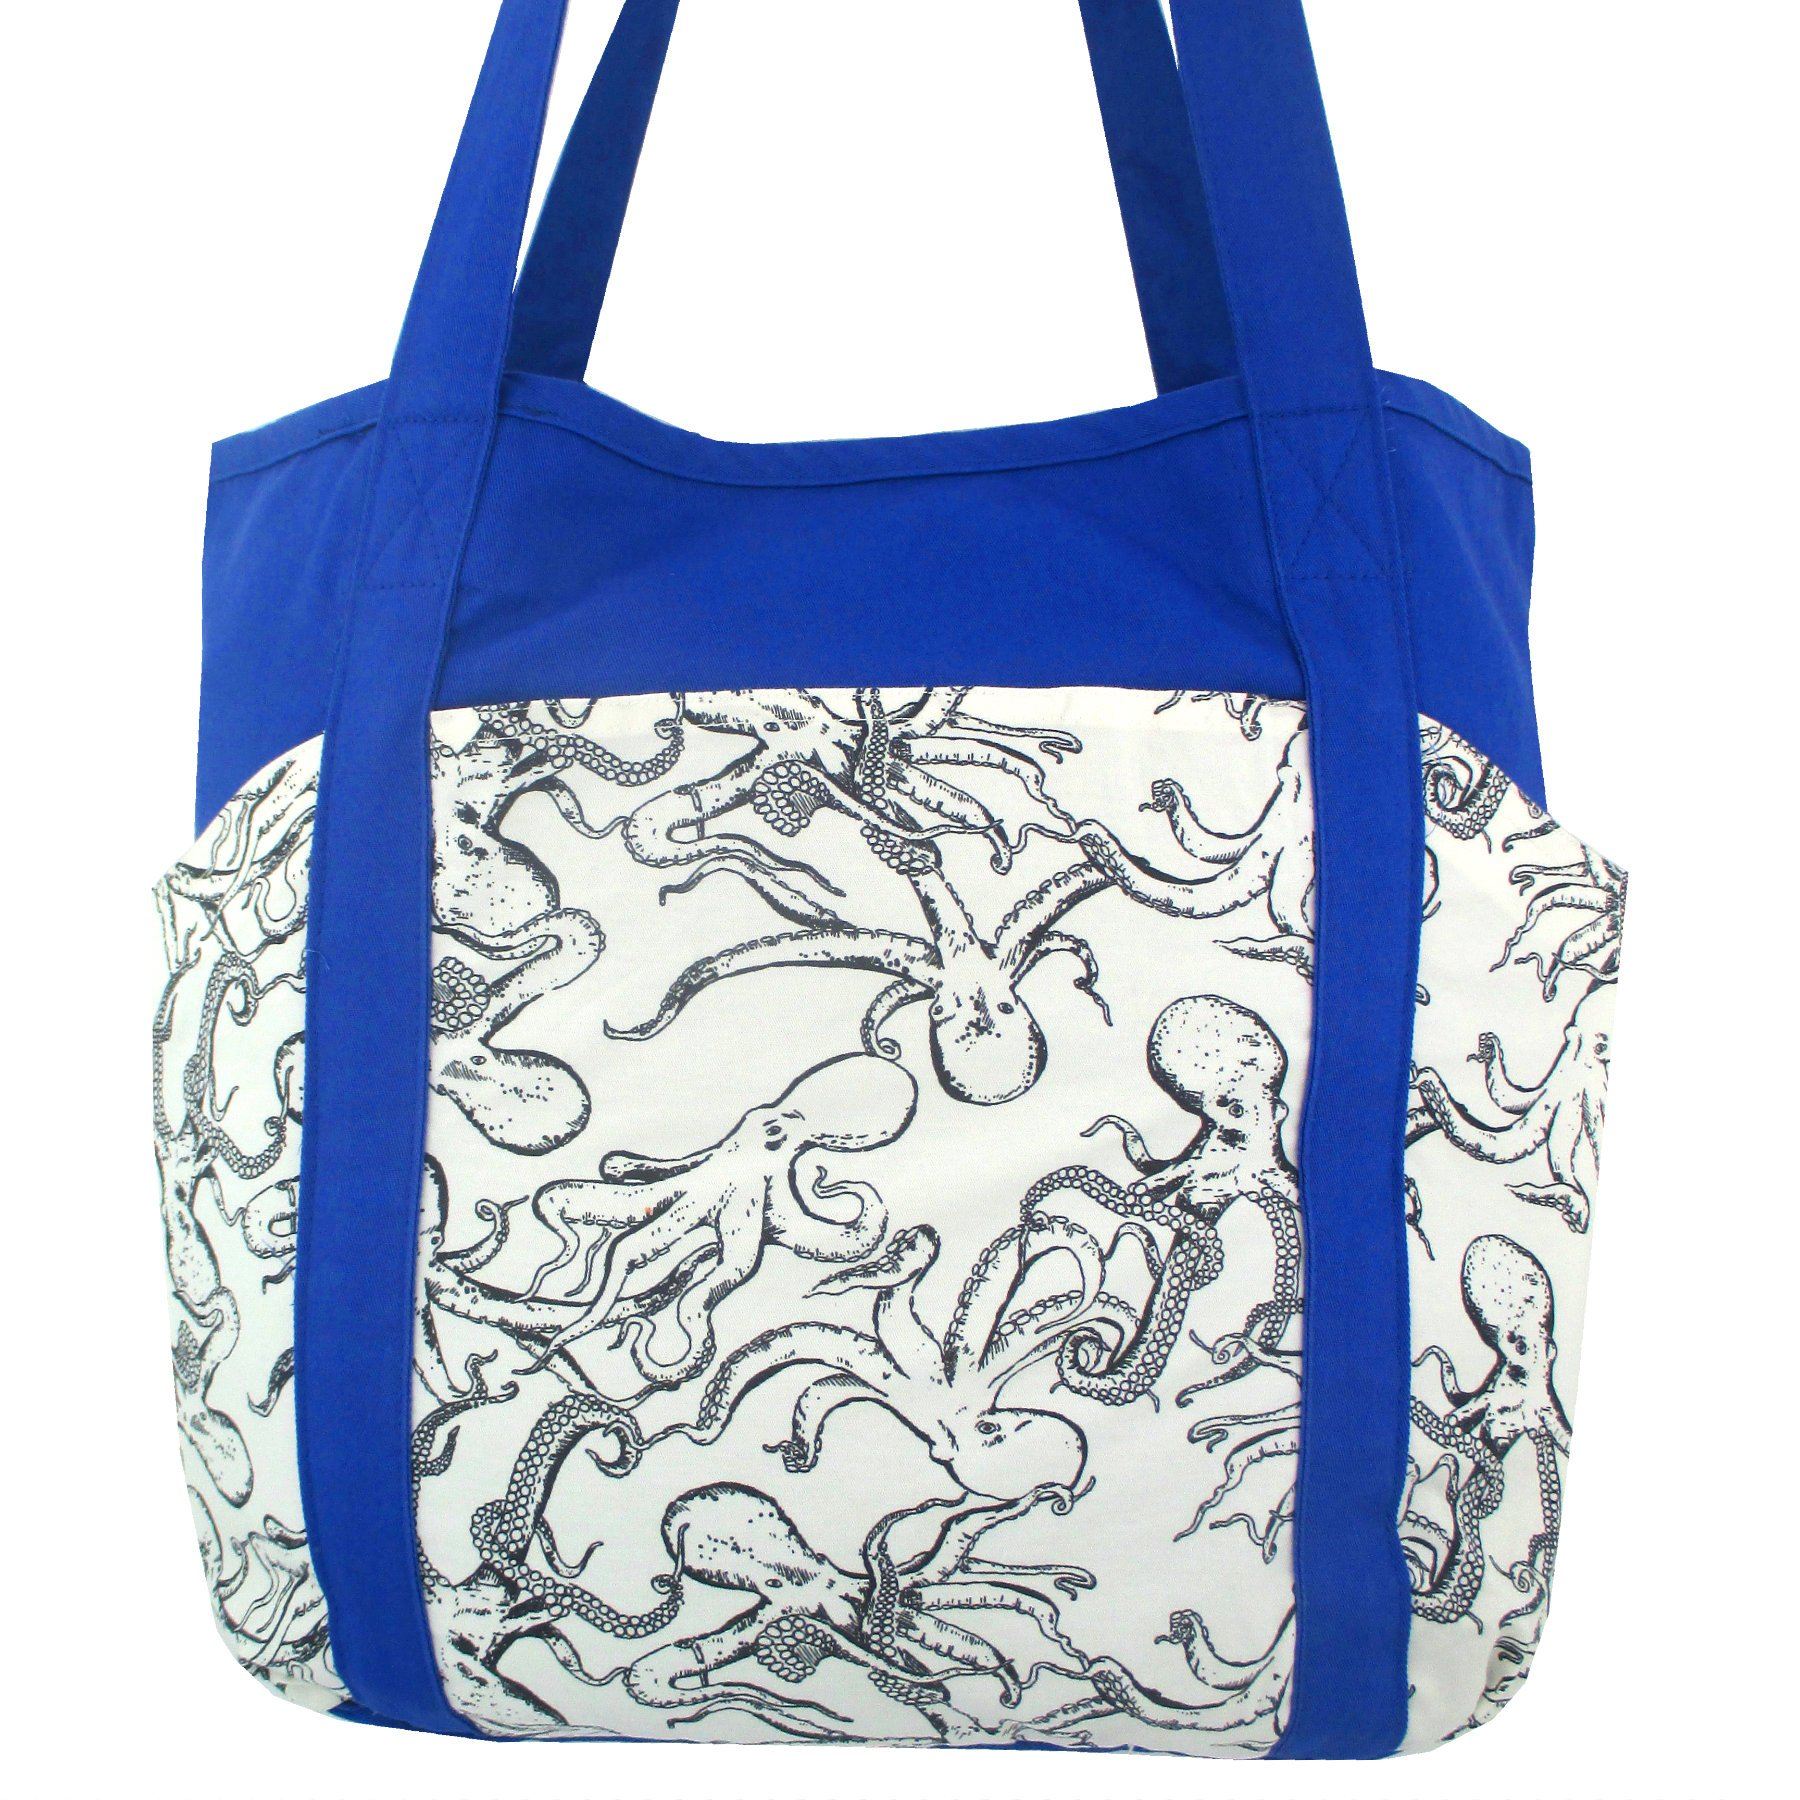 Blue Octopus All Over Print Cotton Weekend Large Utility Tote Bag for Women with Pockets